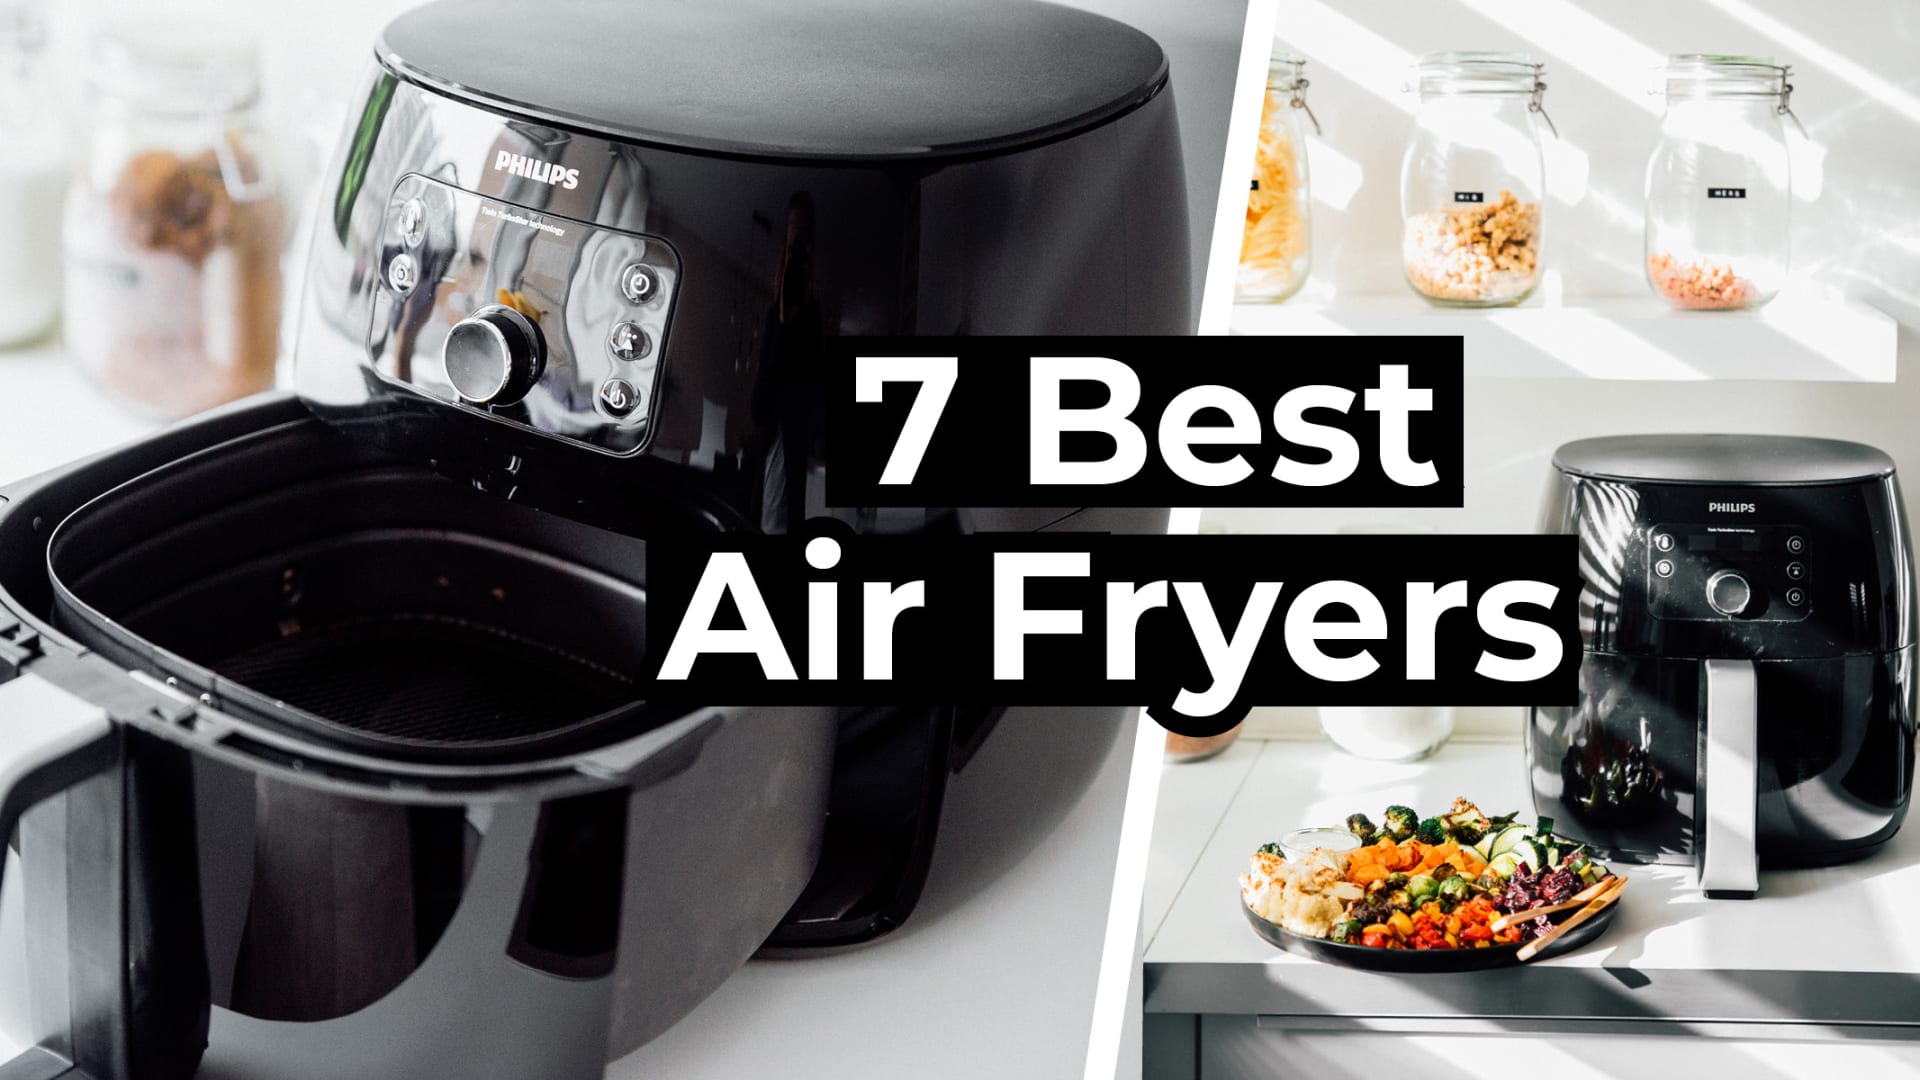 GoWise USA 3.7 Quart Air Fryer with 8 Cook Presets vs GoWise USA 7 Quart  Steam Air Fryer: What is the difference?